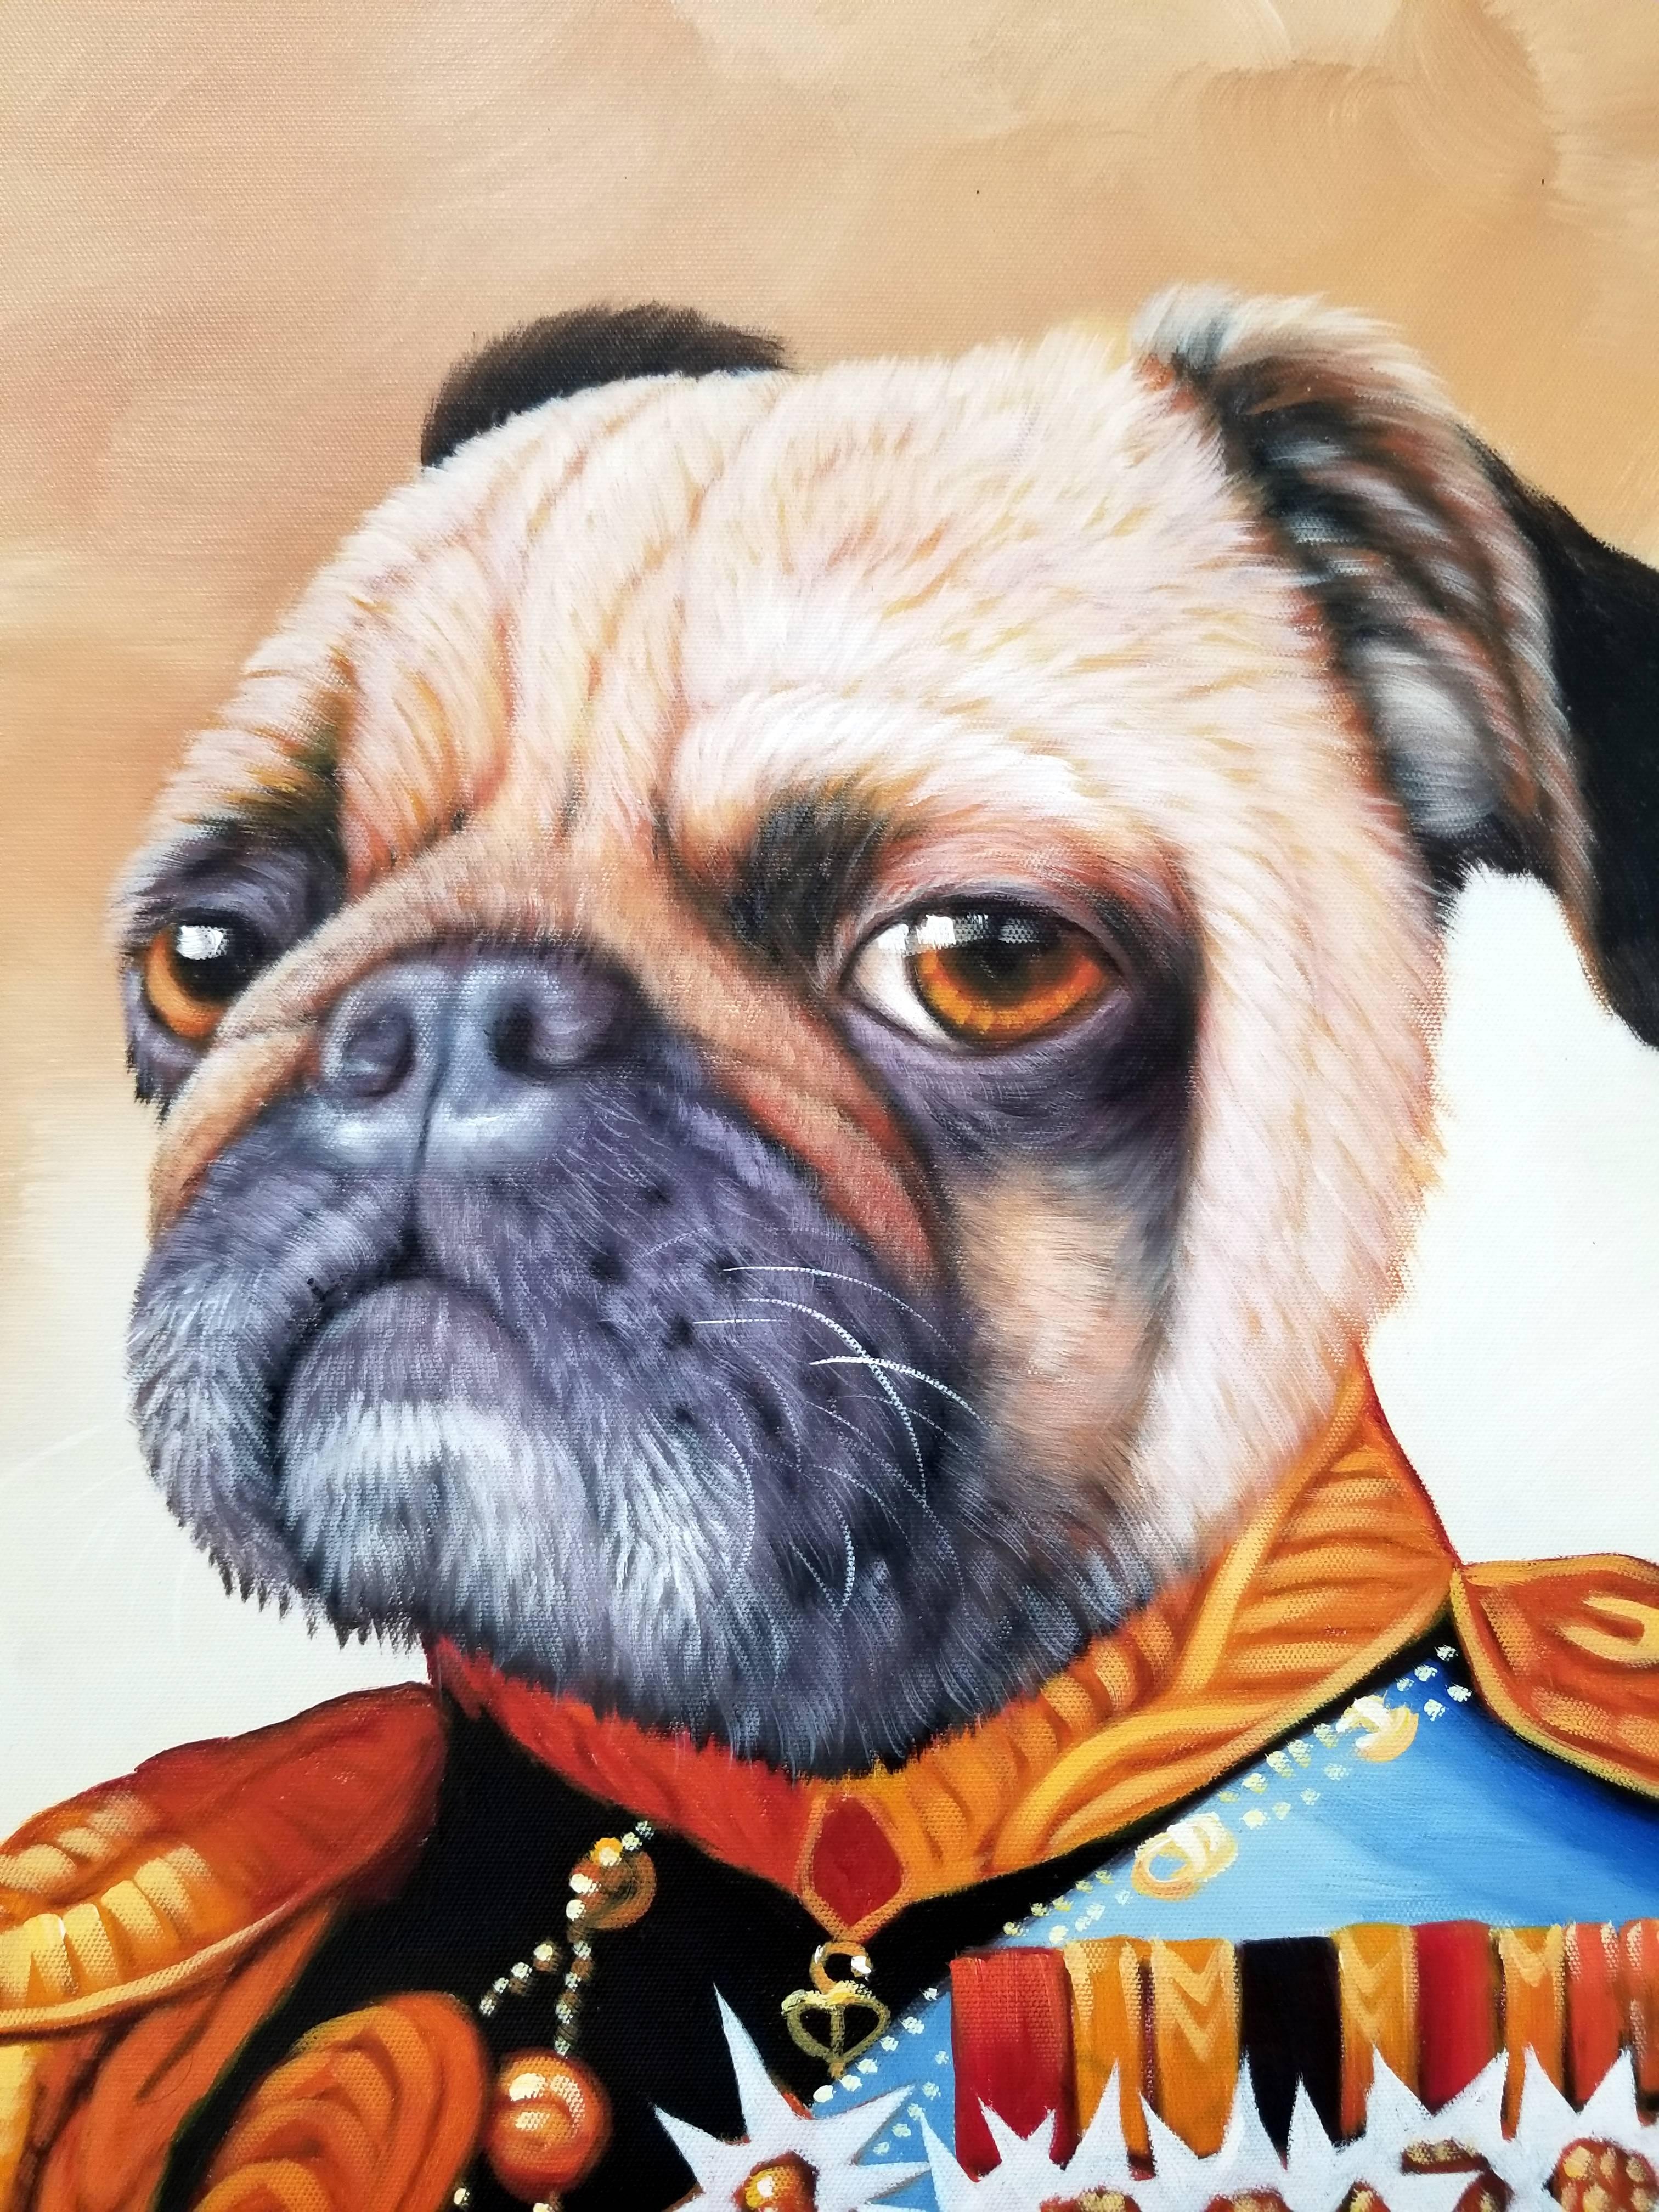 Prince Pug lll - Painting by Y.m.Lo